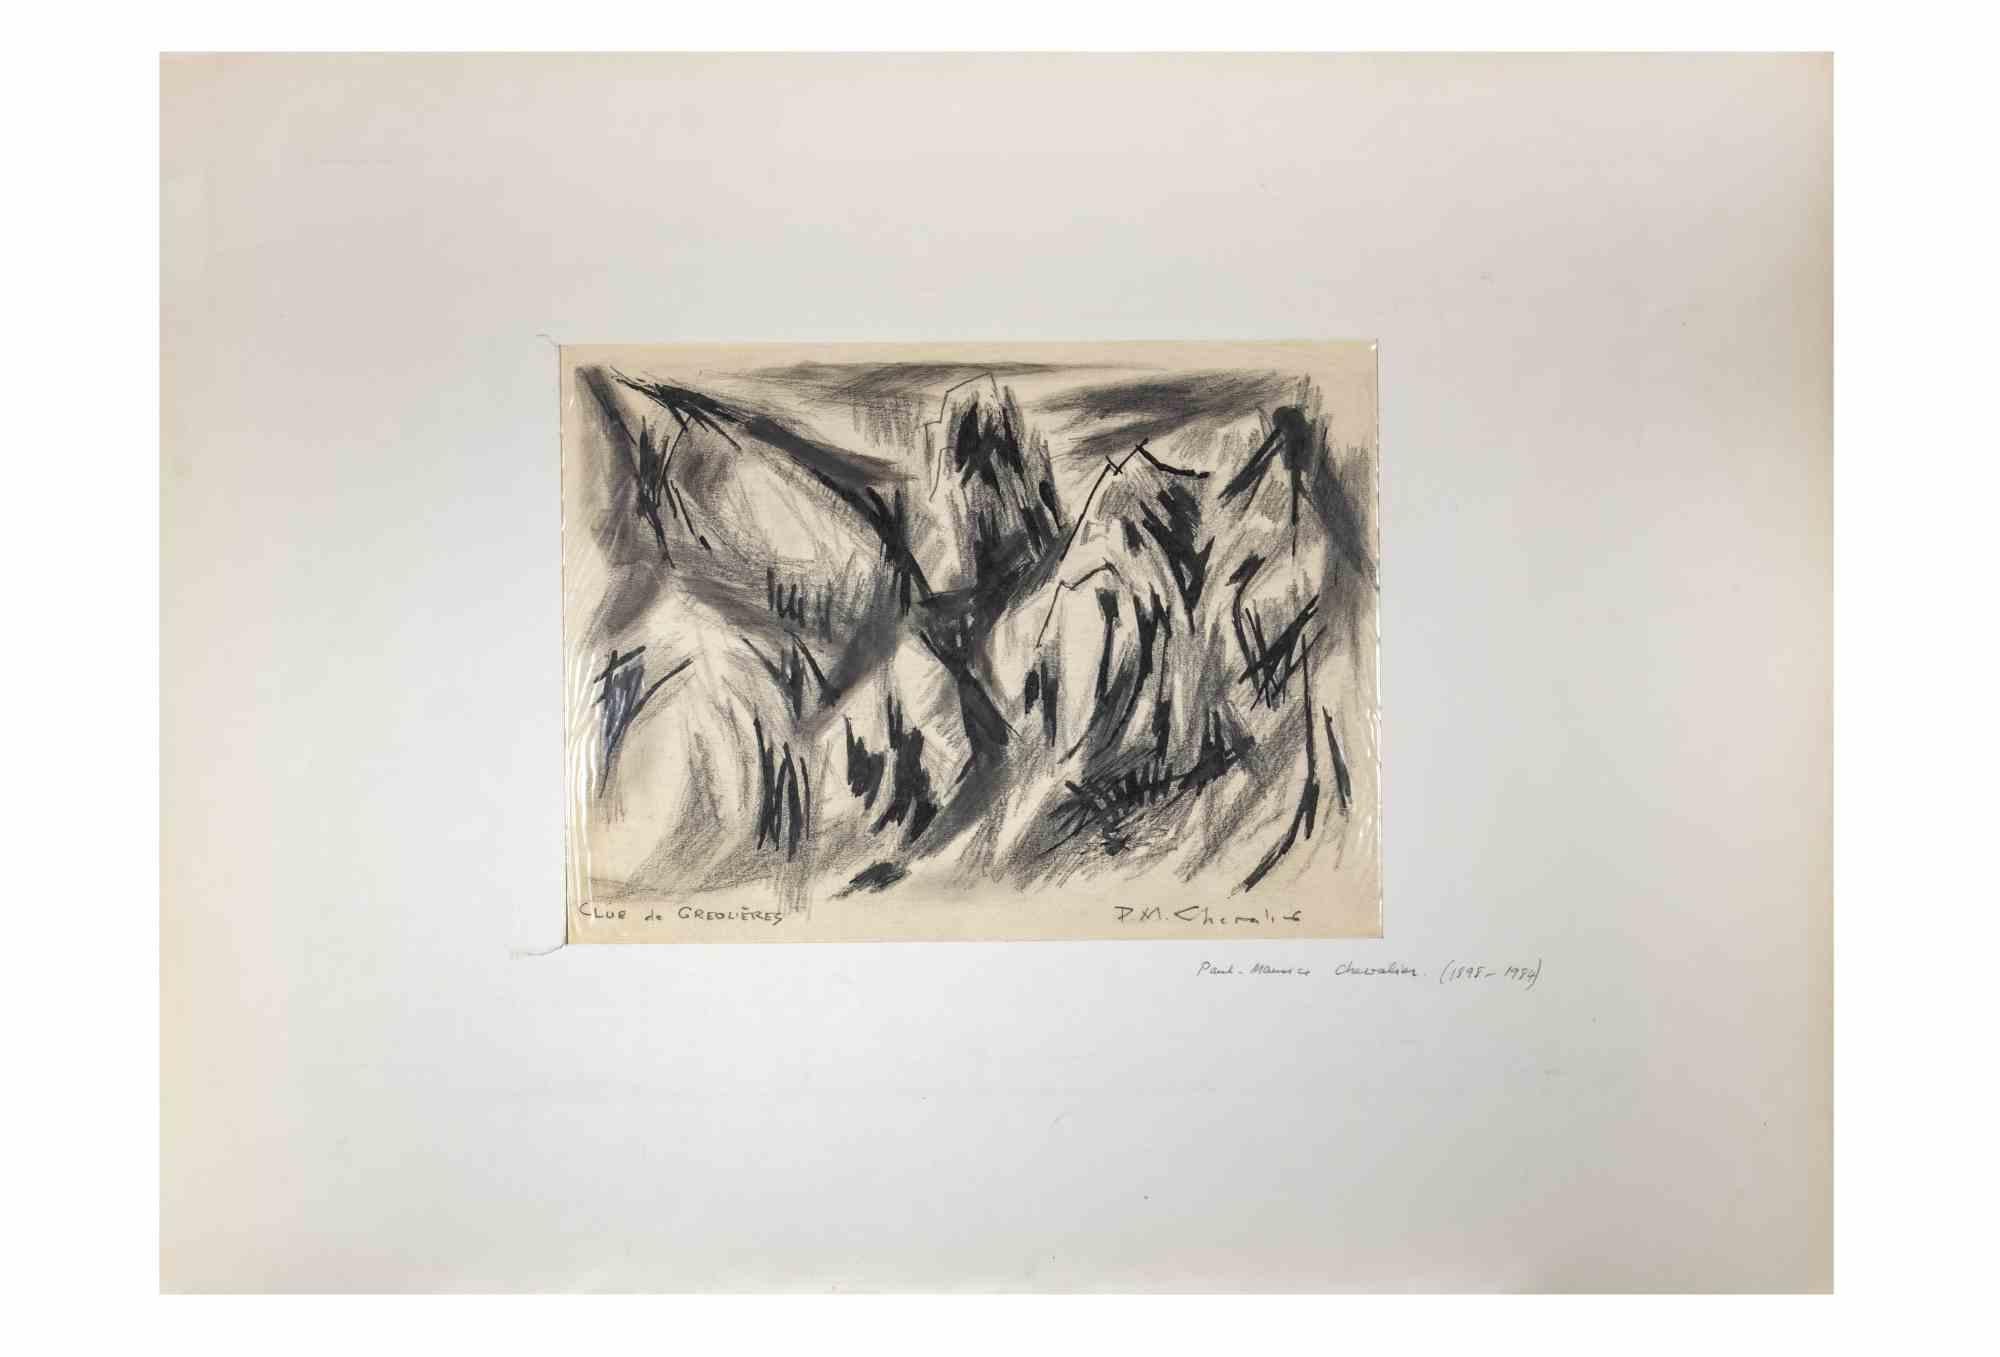 Mountains - Drawing by Paul-Maurice Chevalier - Early 20th Century For Sale 1